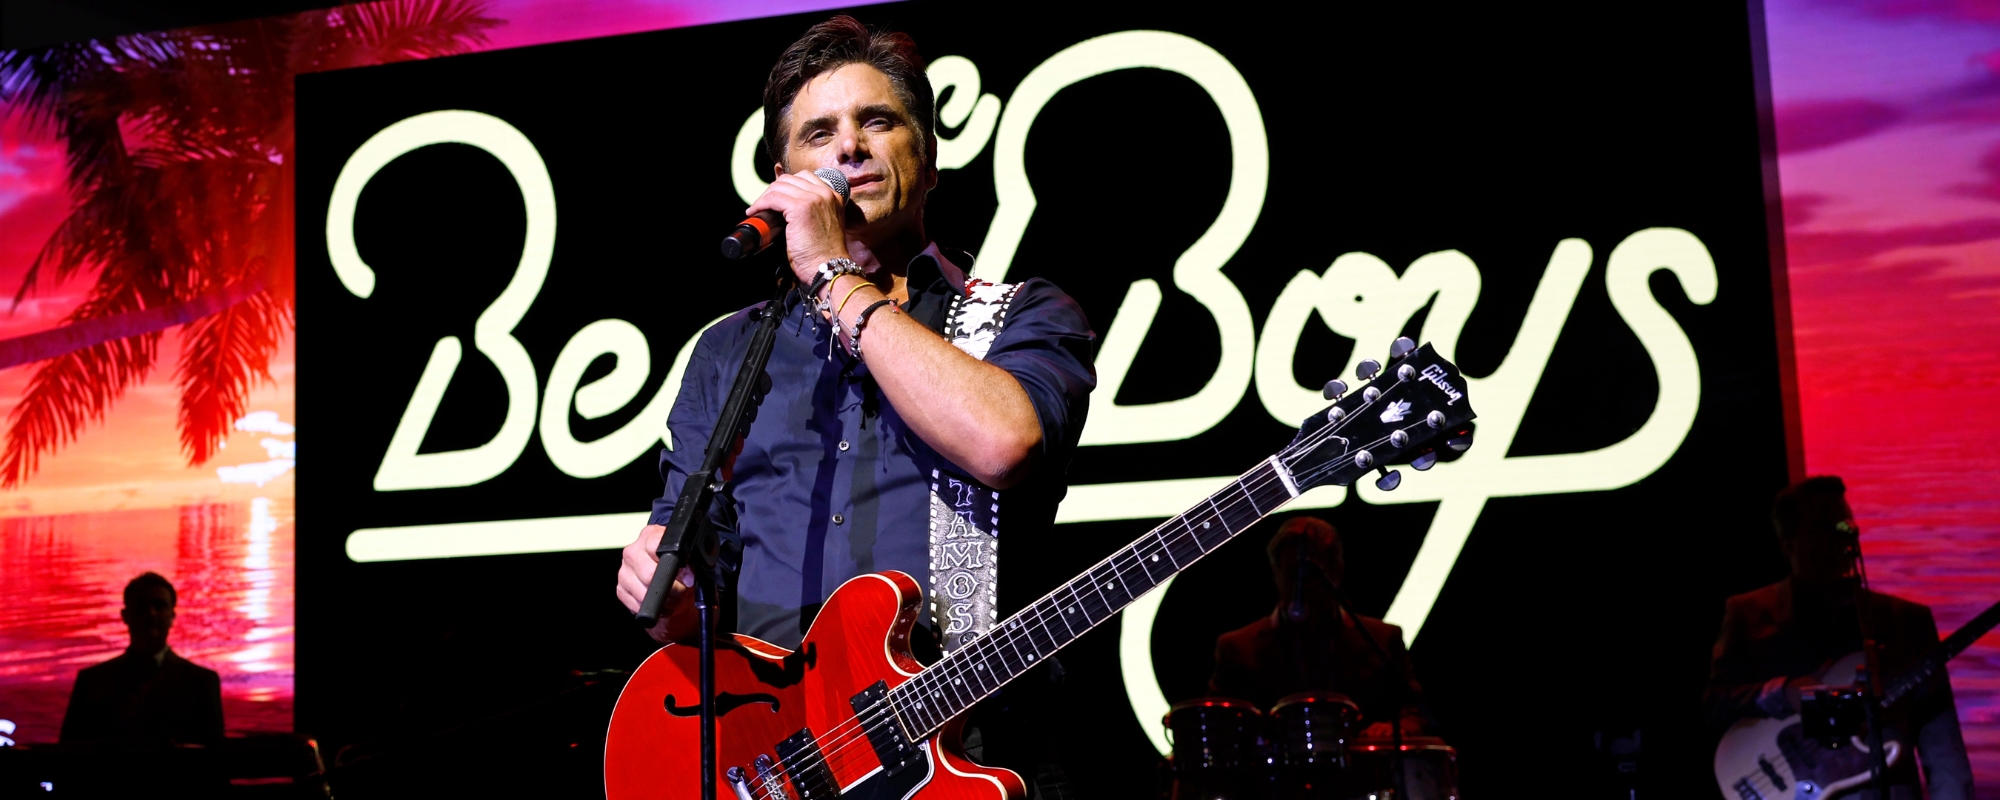 John Stamos Mourns Beach Boys’ Jeff Foskett With Heartbreaking Tribute: “I Lost a Part of My Soul”